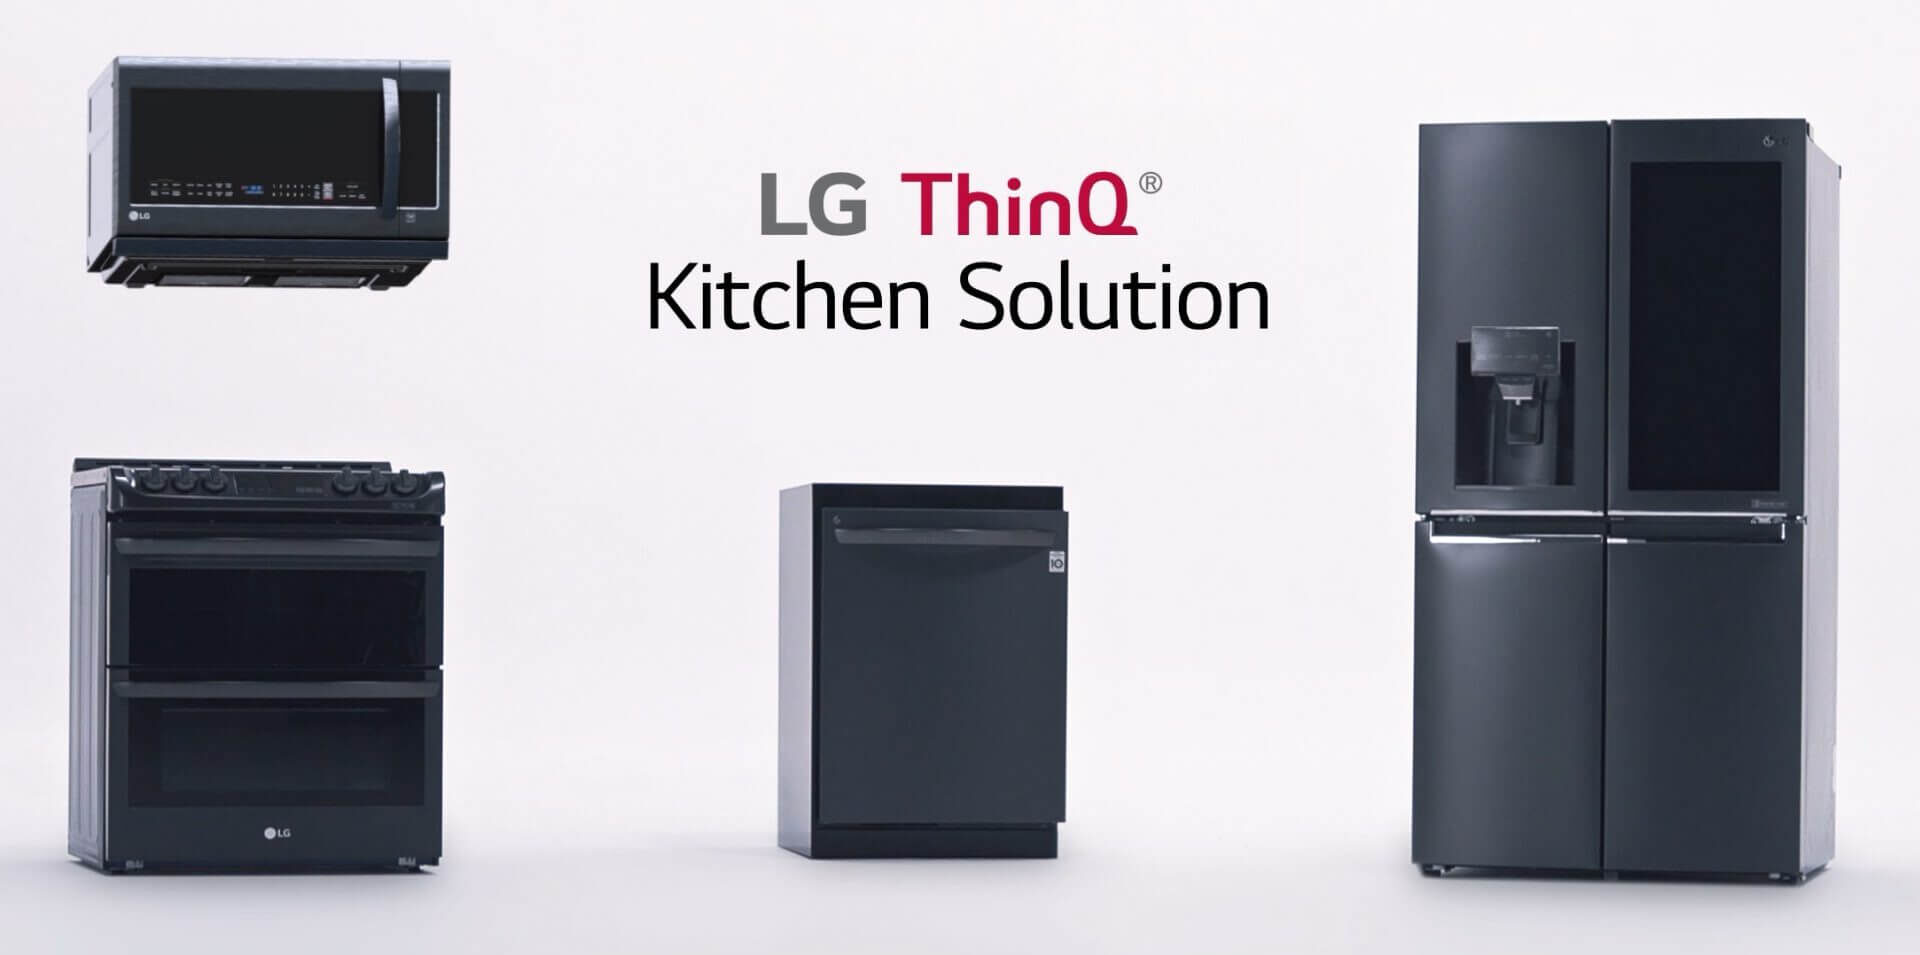 Lg thinq kitchen solution release